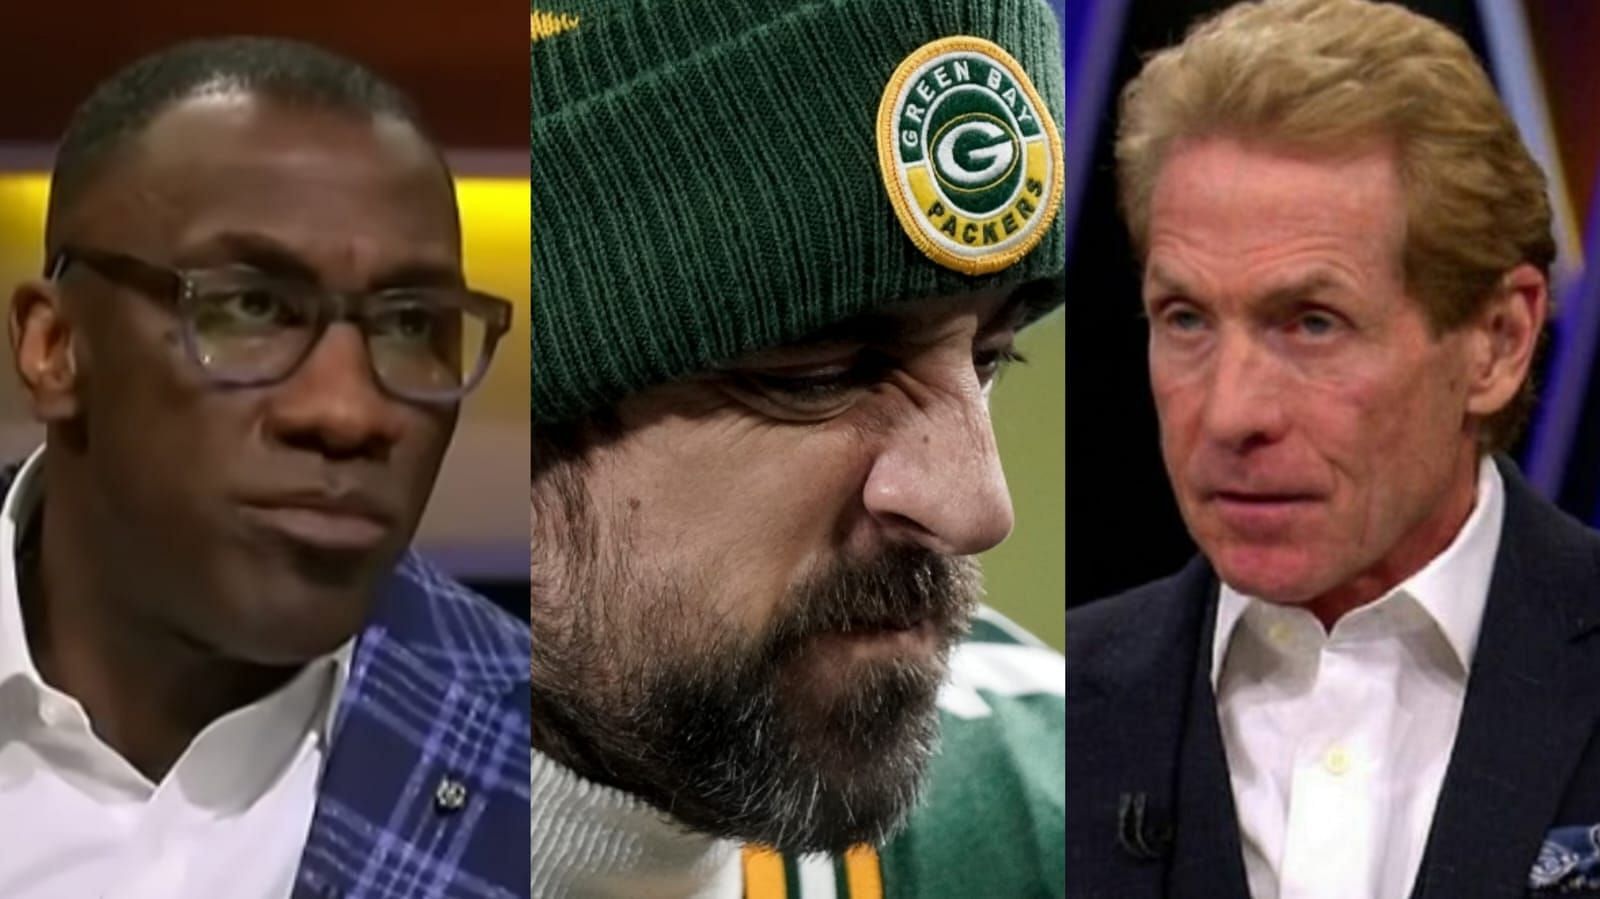 Skip Bayless and Shannon Sharpe lashed out at Aaron Rodgers